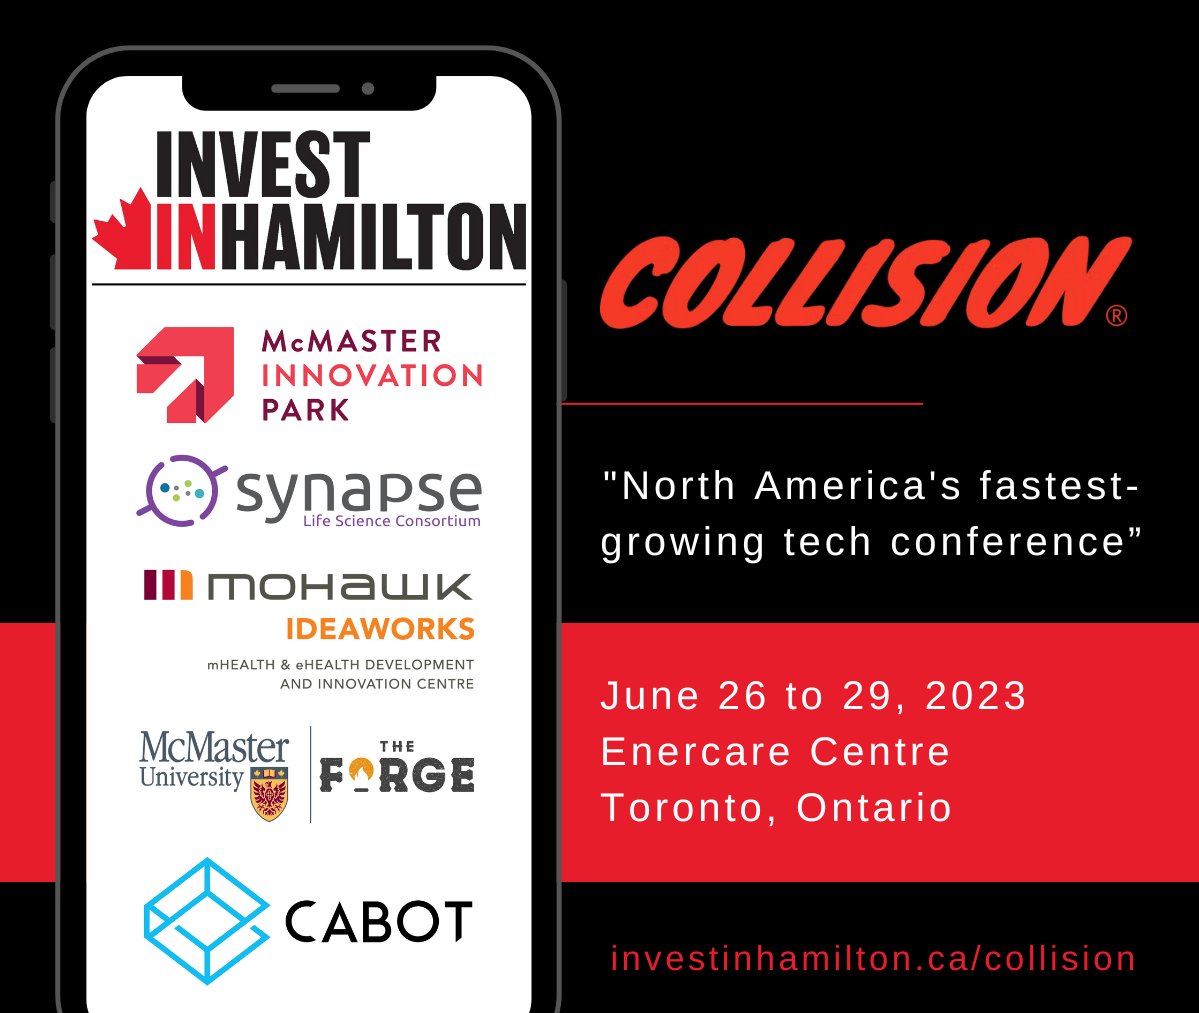 Invest in Hamilton and our partners are thrilled to be attending #CollisionConf from June 26-29. Stop by booth 0404-48 and learn why #HamOnt was ranked top-2 in North America for tech opportunities!

@MIP_Hamilton
@SynapseLifeSci
@MohawkIDEAWORKS
@forgemcmaster
@cabotsolutions